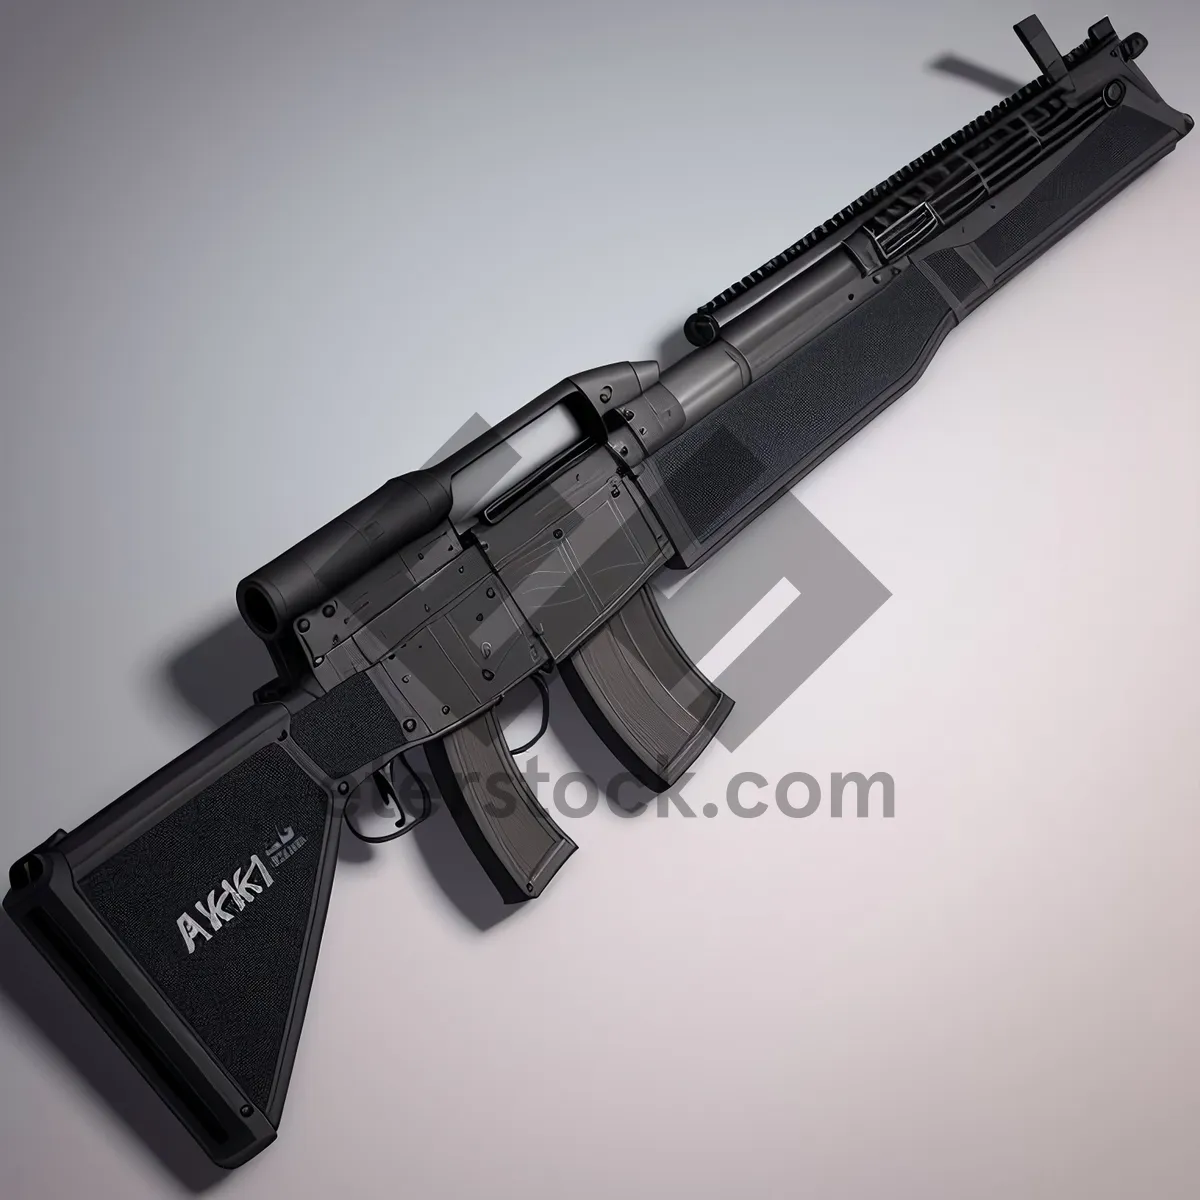 Picture of Military Assault Rifle with Ammo Cartridge Holder